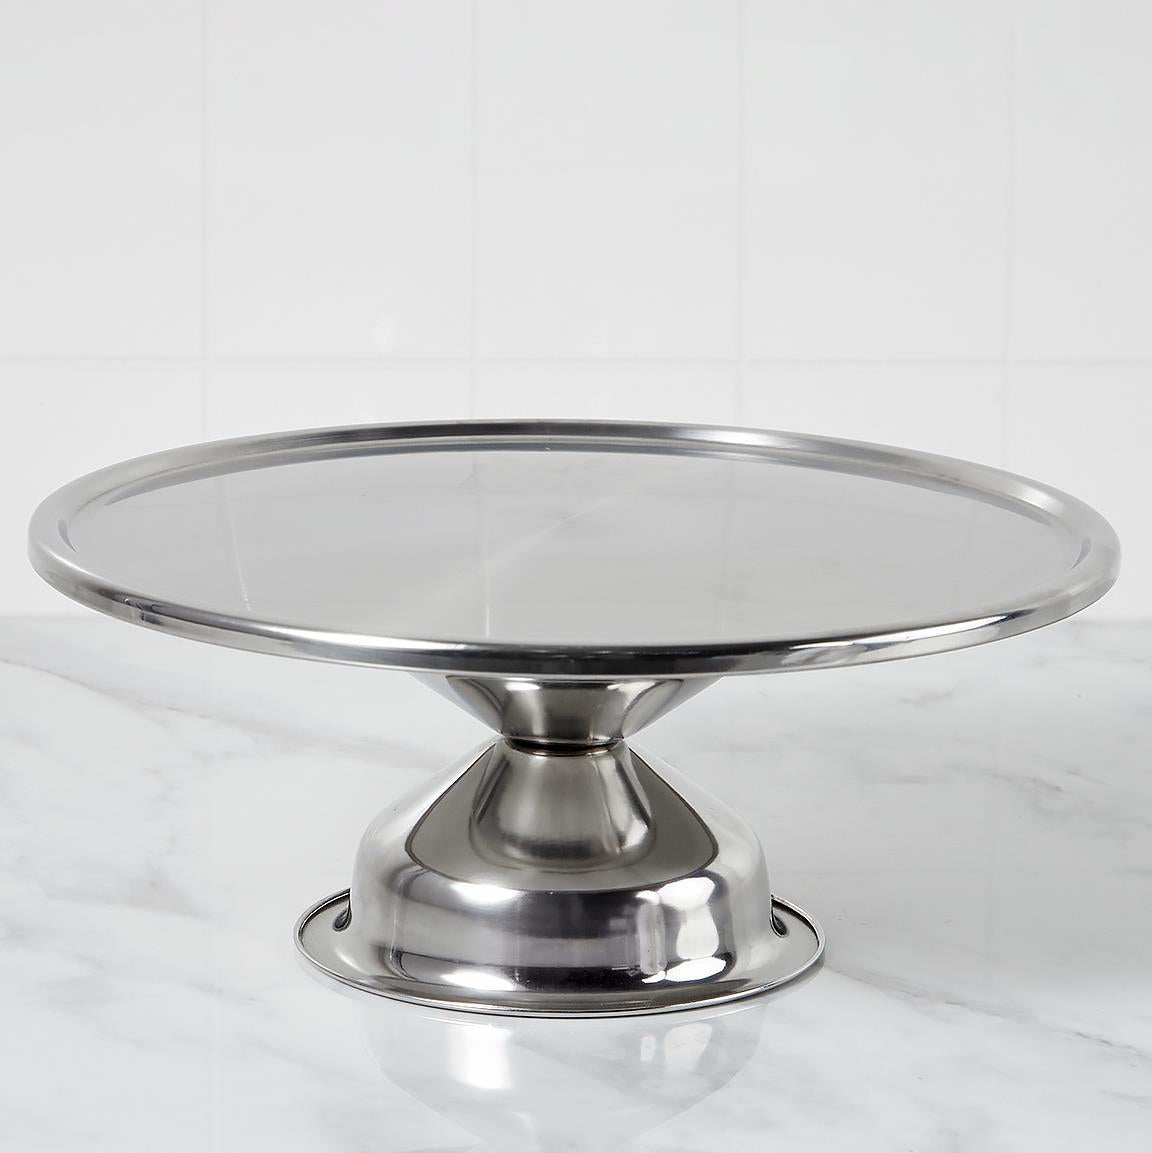 GEEZY Stainless Steel Cake Stand 33 cm